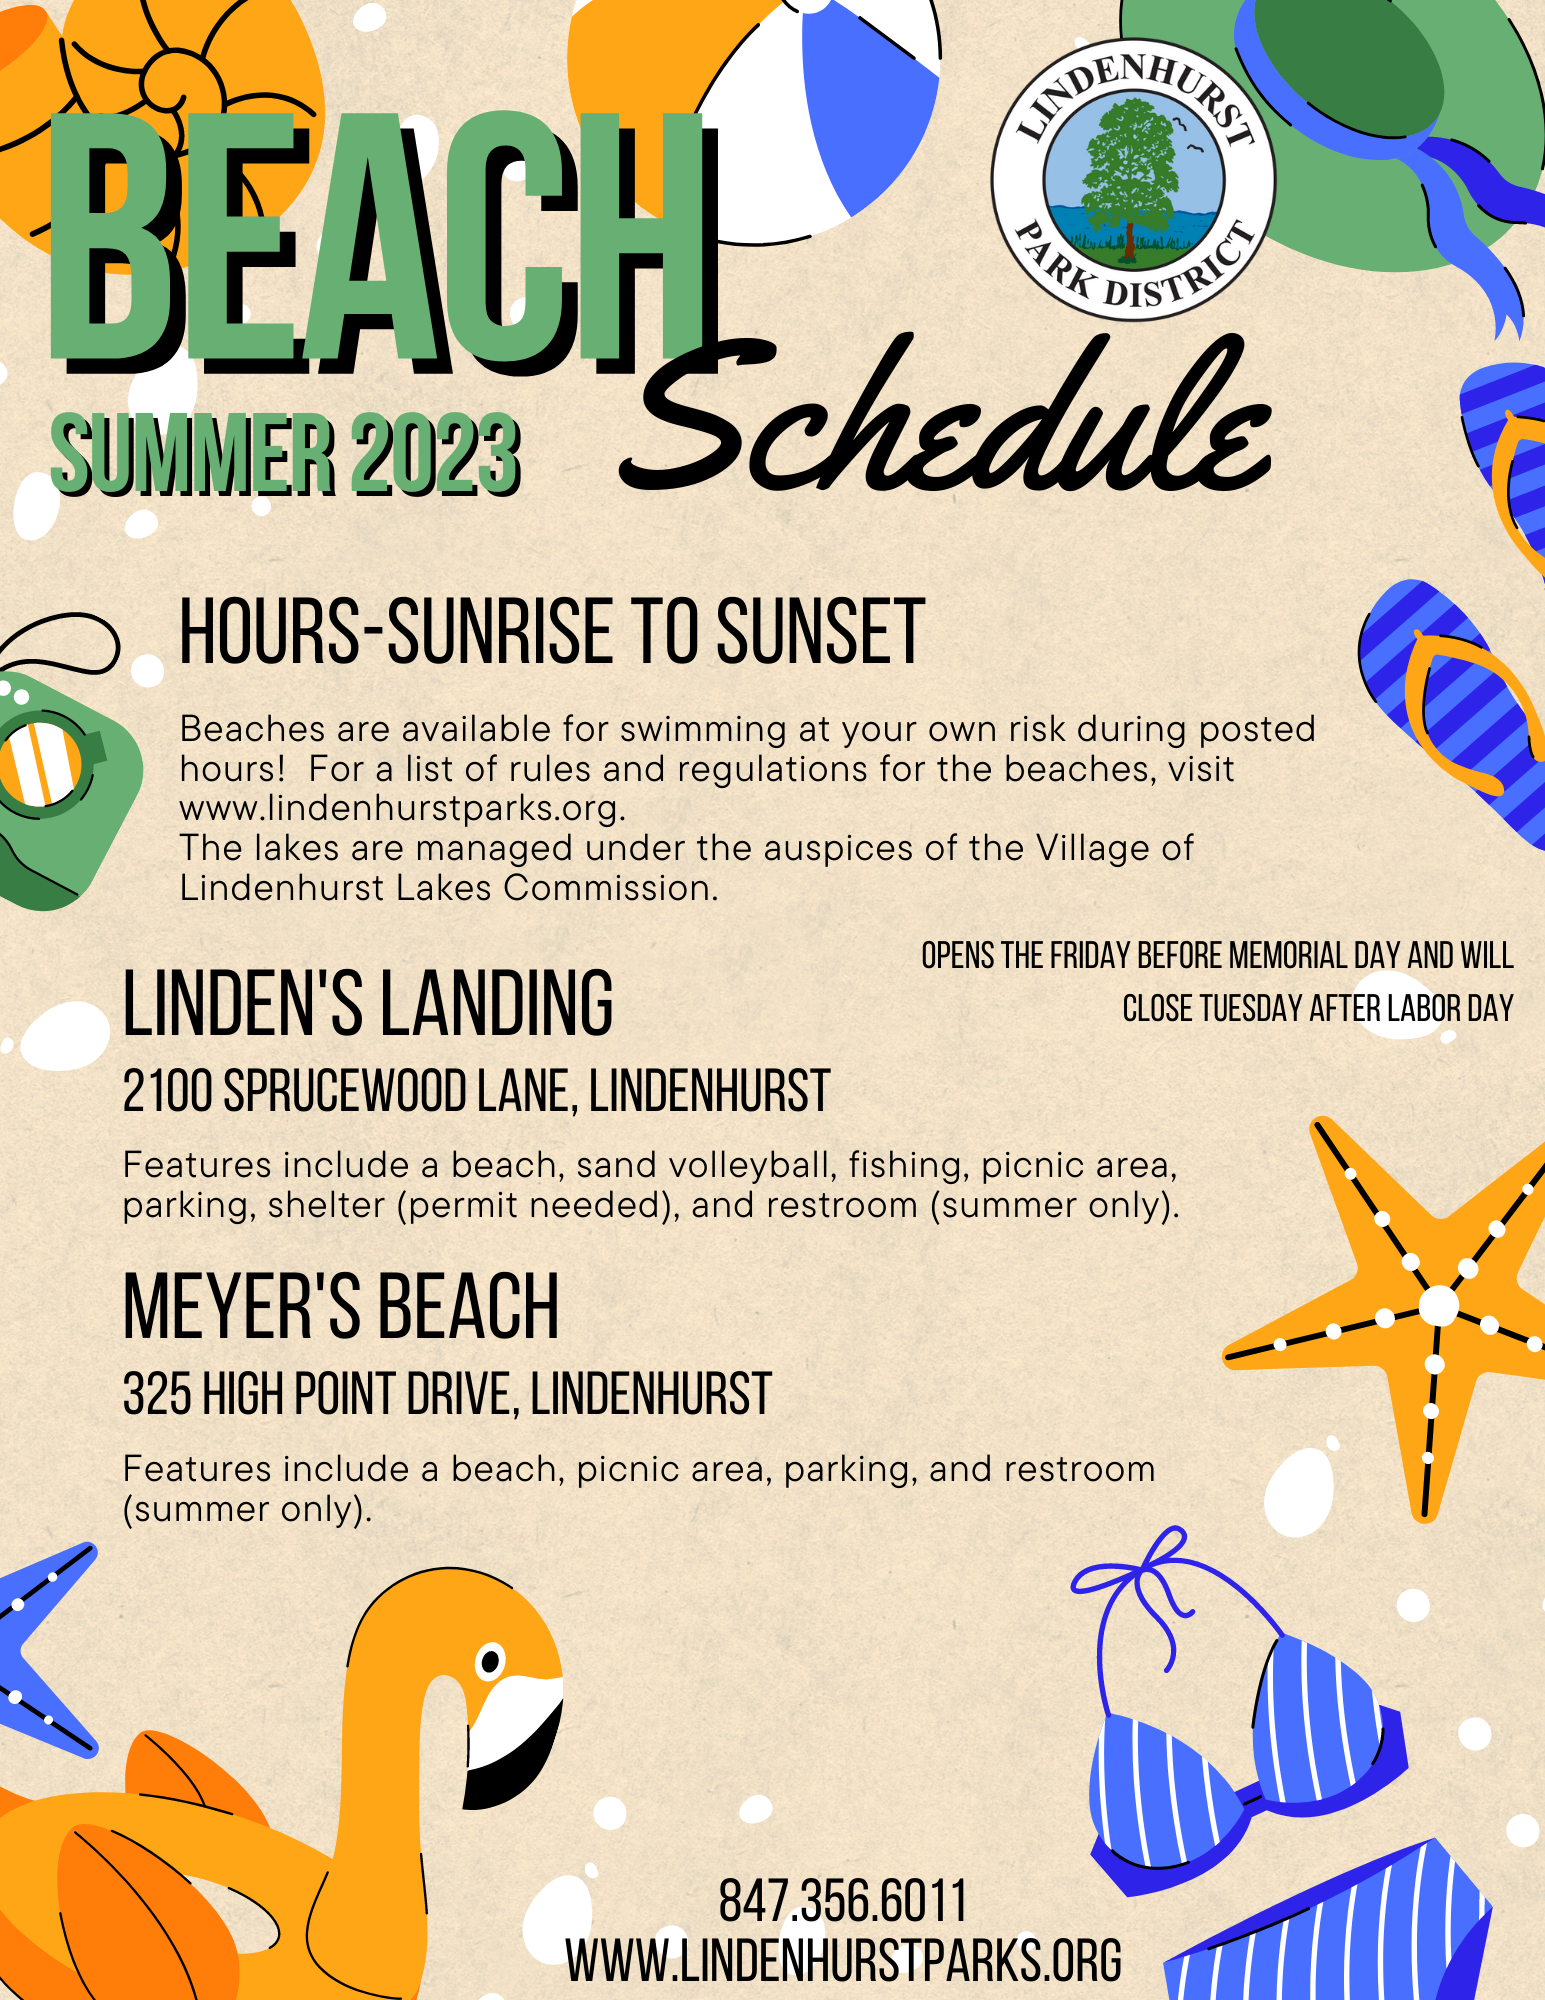 
The flyer is for the Lindenhurst Park District's Summer 2023 Beach Schedule, featuring hours from sunrise to sunset. It lists two locations: Linden's Landing, with amenities such as a beach, volleyball, fishing, and more, and Meyer's Beach, offering a beach, picnic area, and other facilities. The beaches open the Friday before Memorial Day and close the day after Labor Day. There's a reminder that the lakes are managed by the Village of Lindenhurst Lakes Commission and the flyer includes the park district's contact information and website. The design incorporates summery beach graphics like swim rings, starfish, and flip-flops